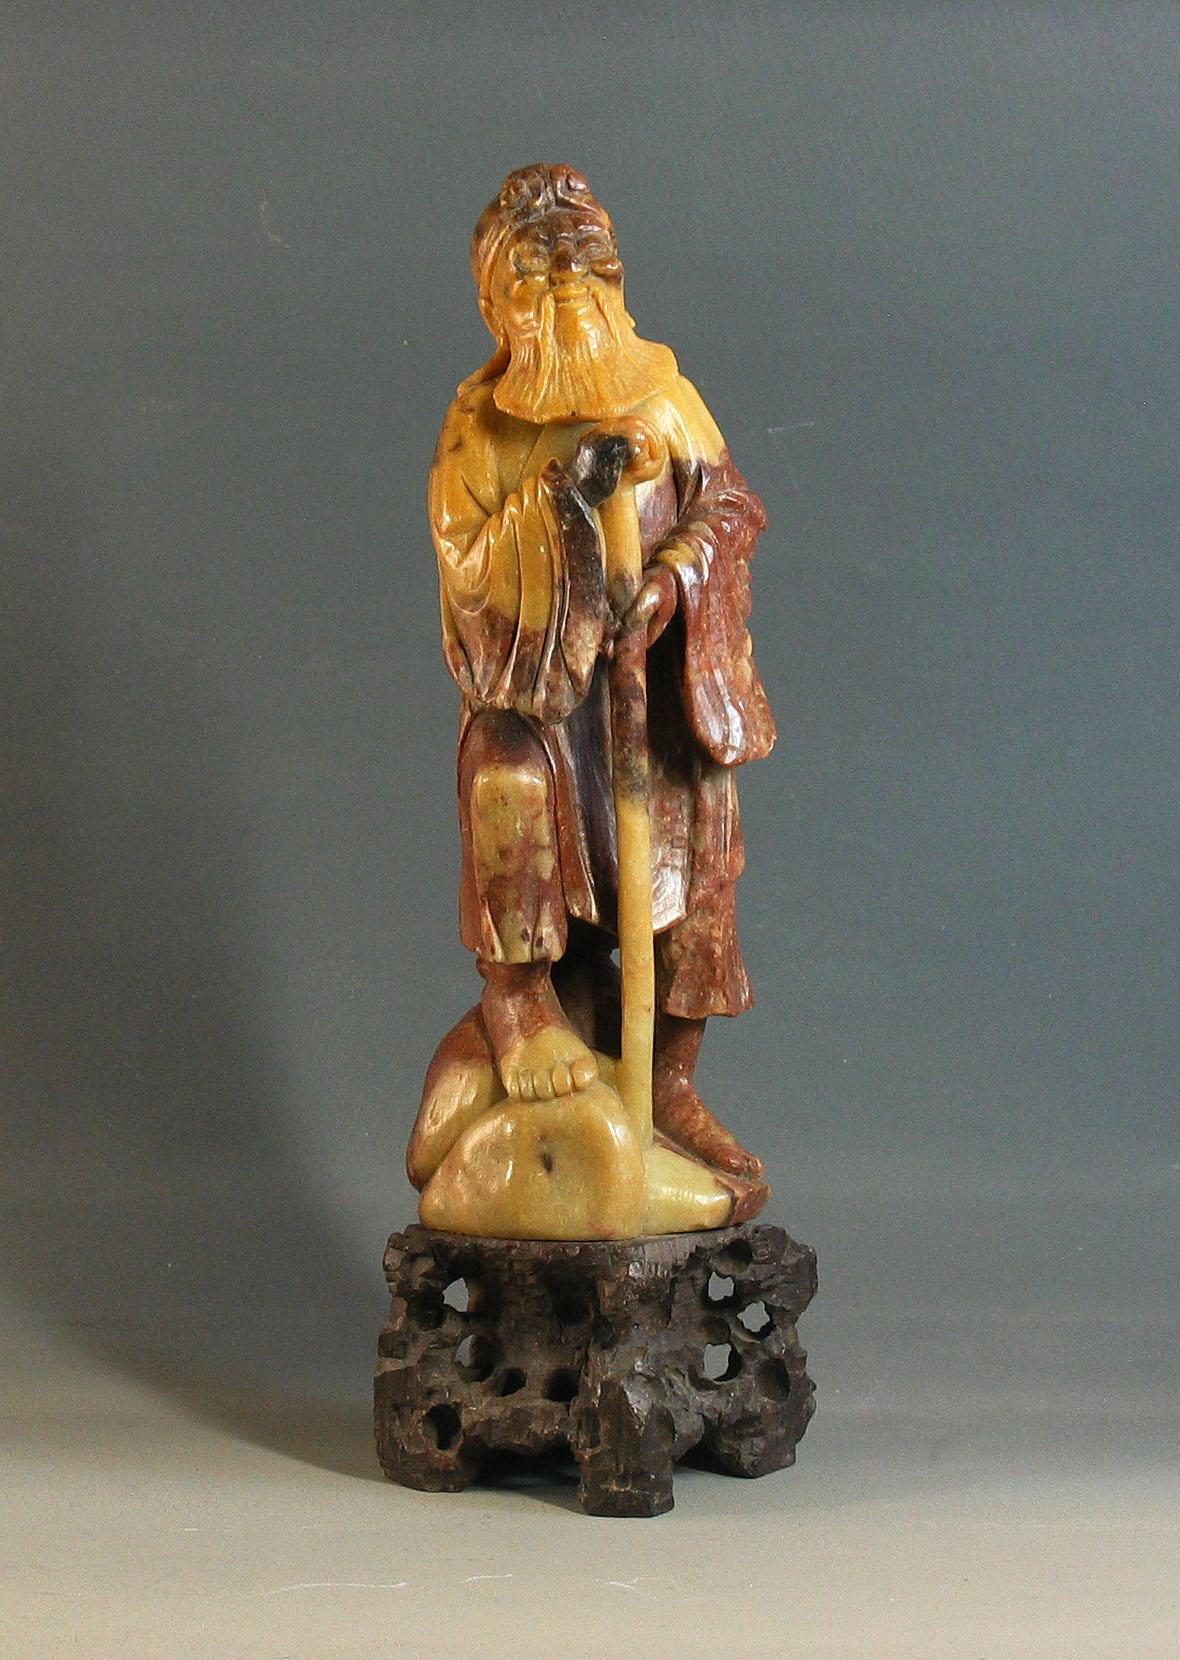 carved chinese figures